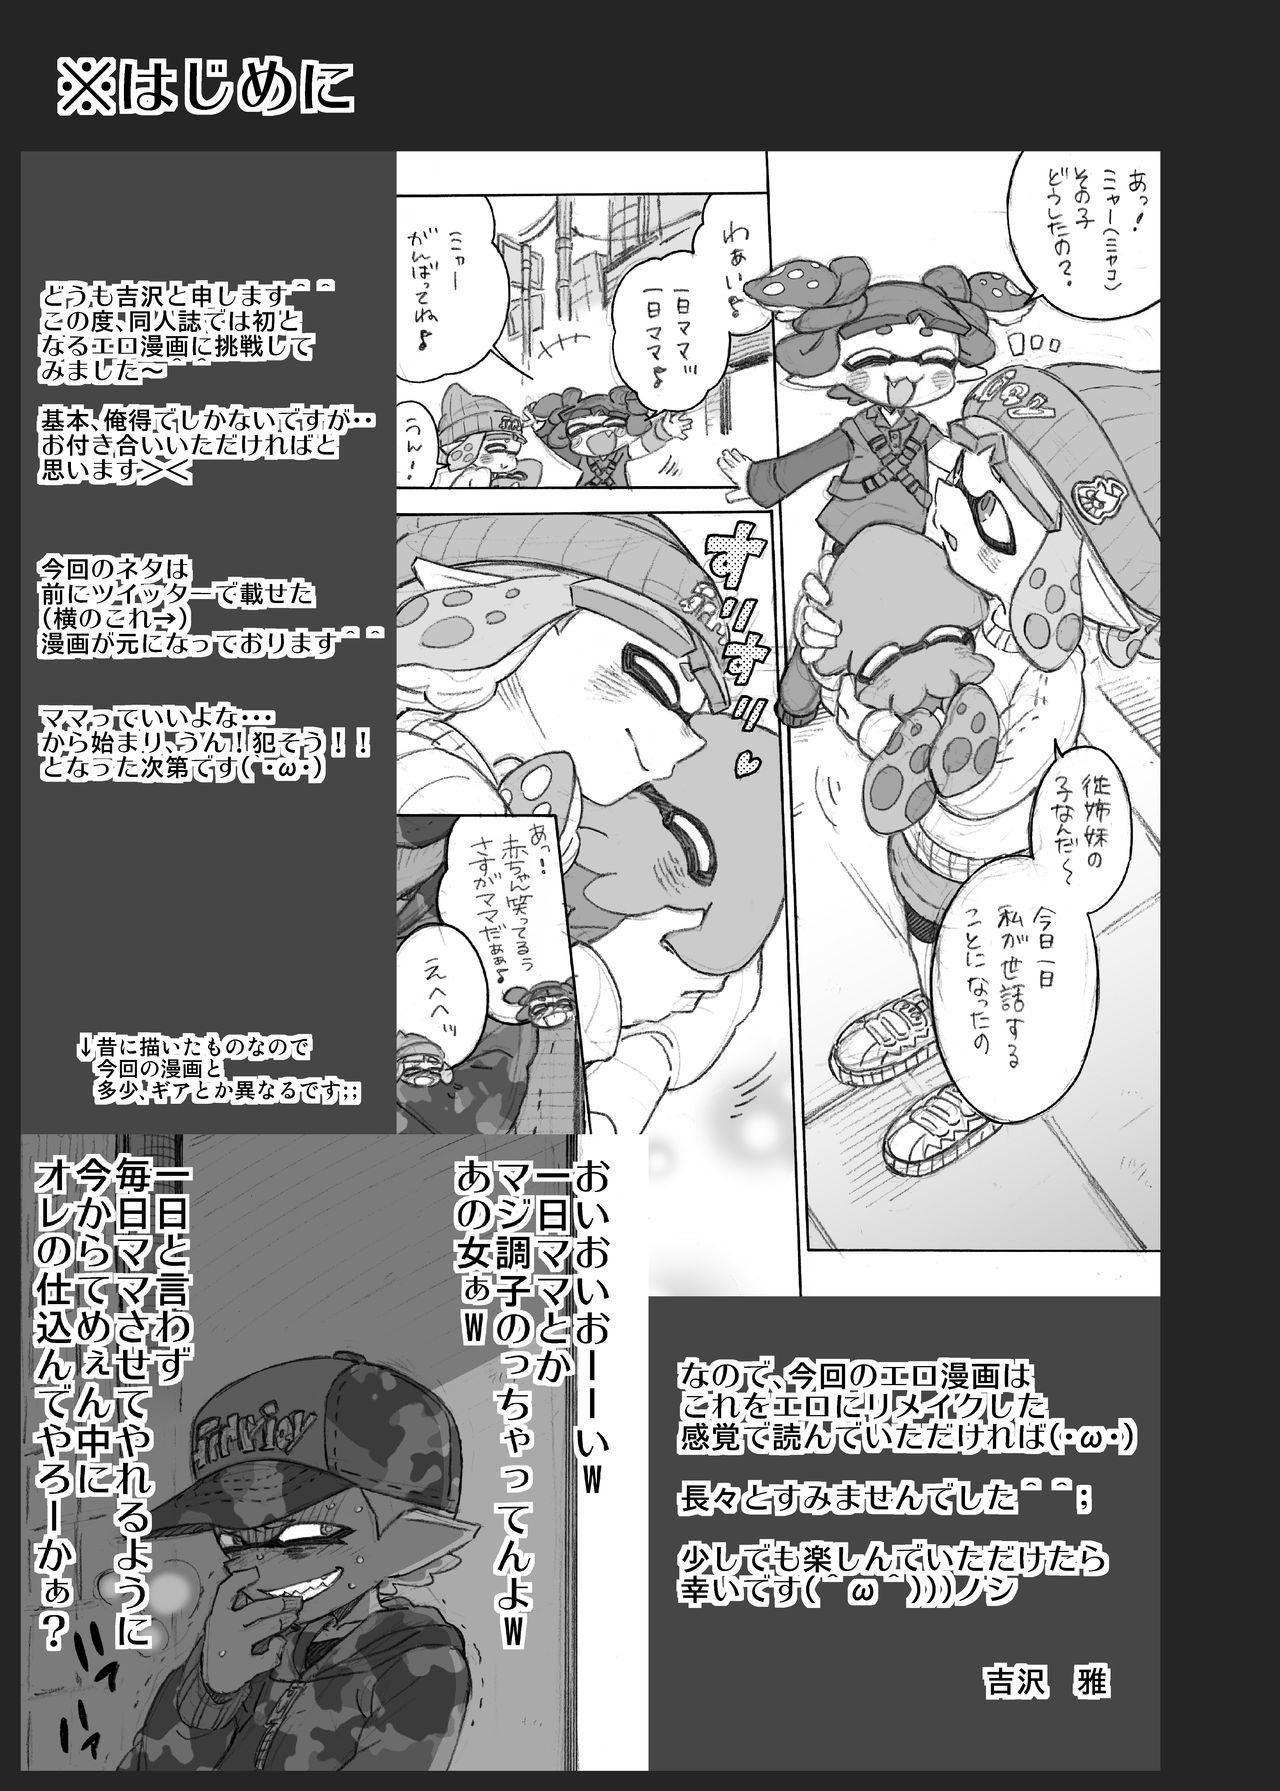 Amateur Blowjob Let's make that anxious daughter a mama - Splatoon Cogida - Page 2